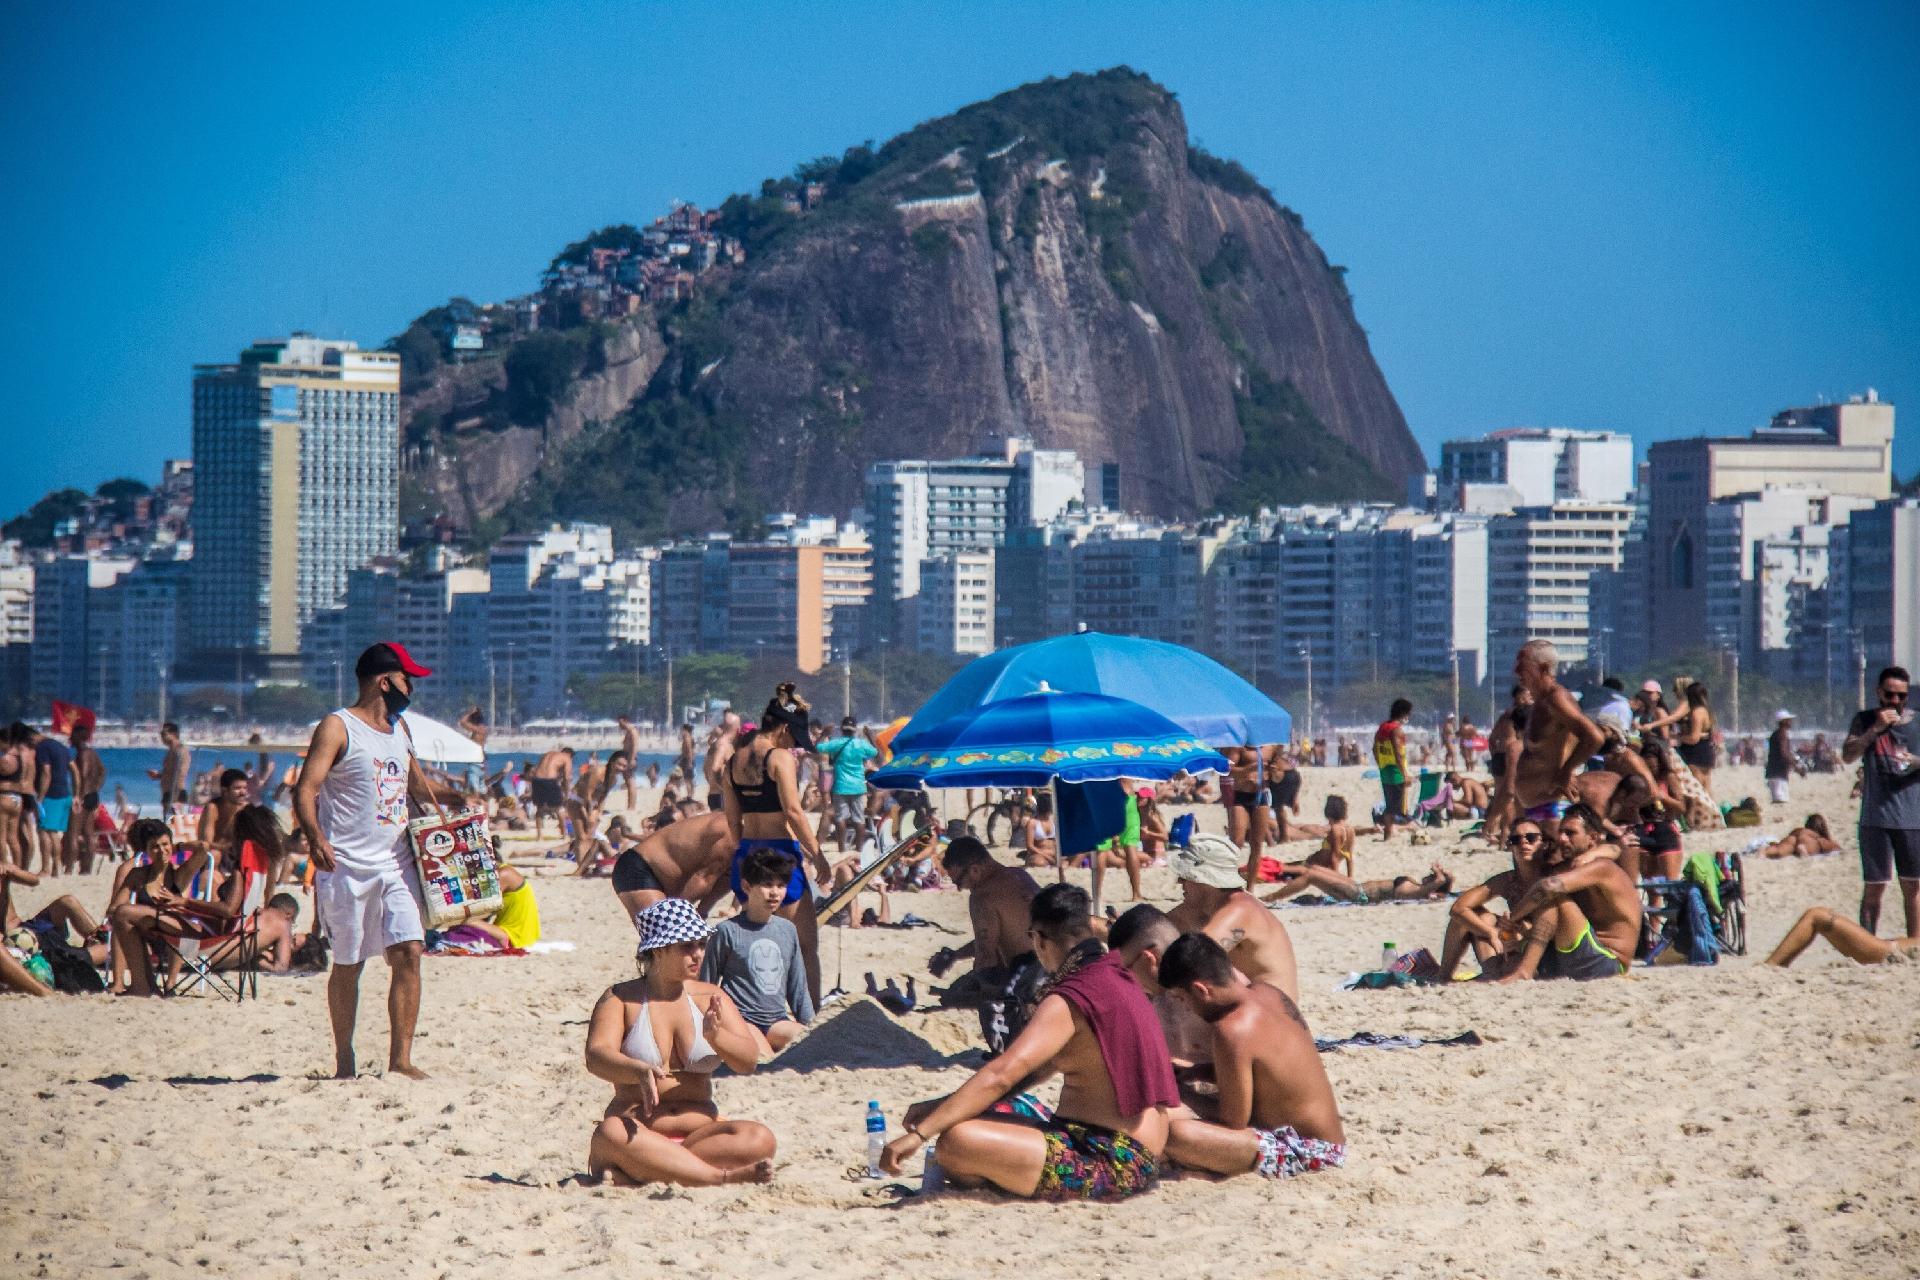 The Rio de Janeiro's city government gave up on the project in which citizens would have to reserve beach space through an 'online' App, given the criticism triggered by this initiative aimed at fighting Covid-19.